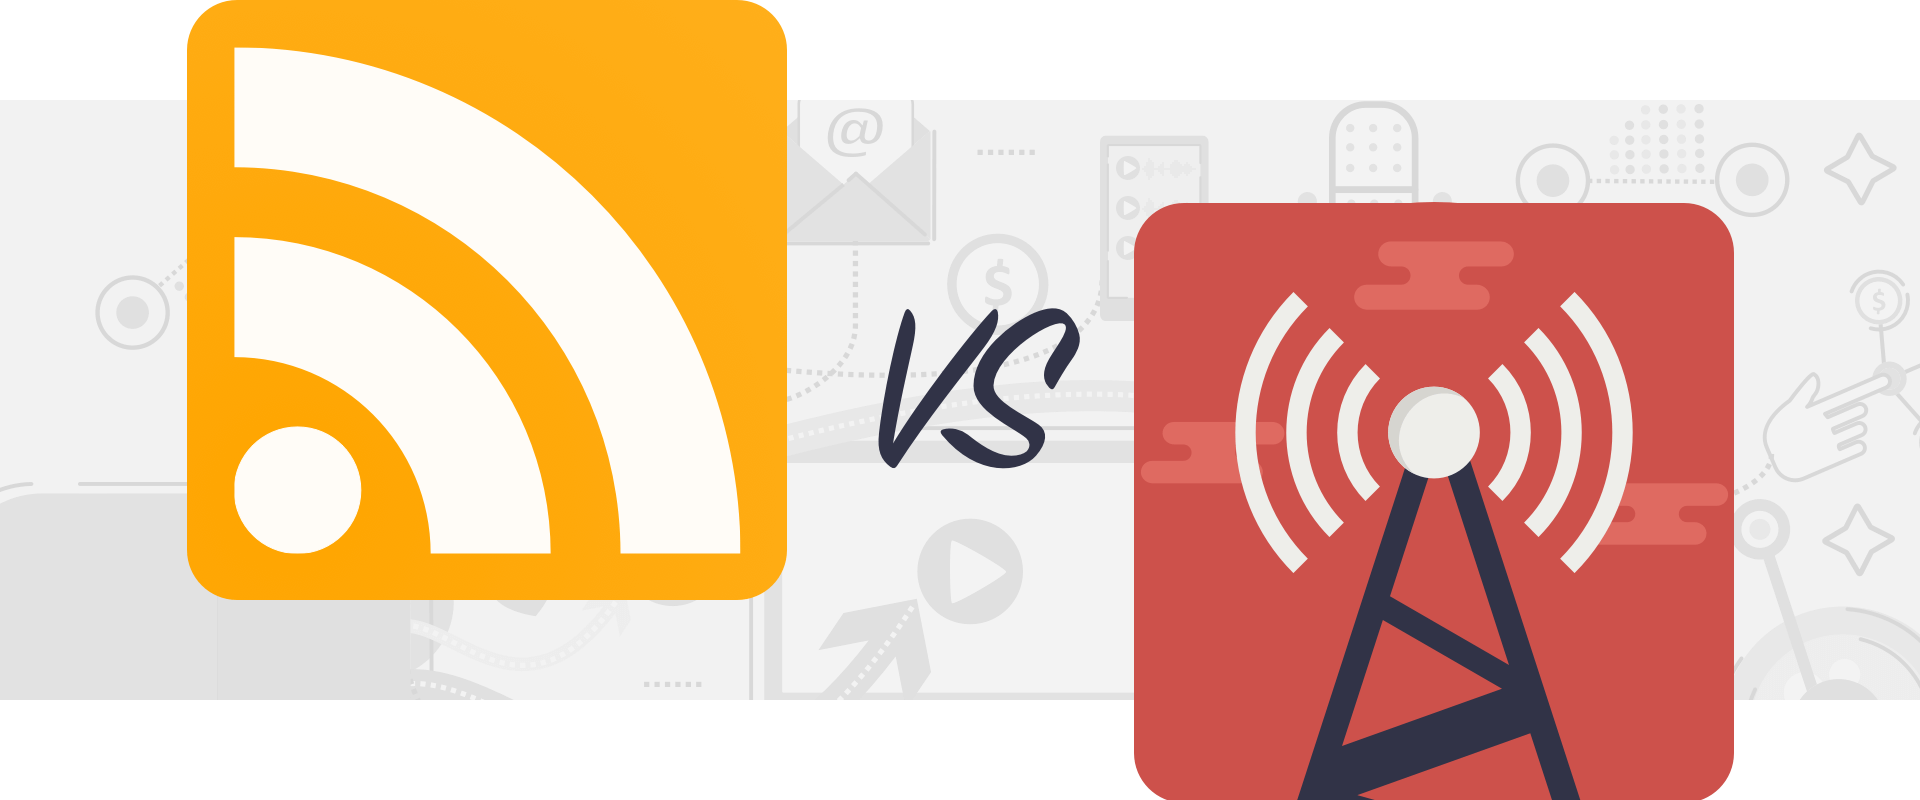 Podcast vs Radio What is the difference?